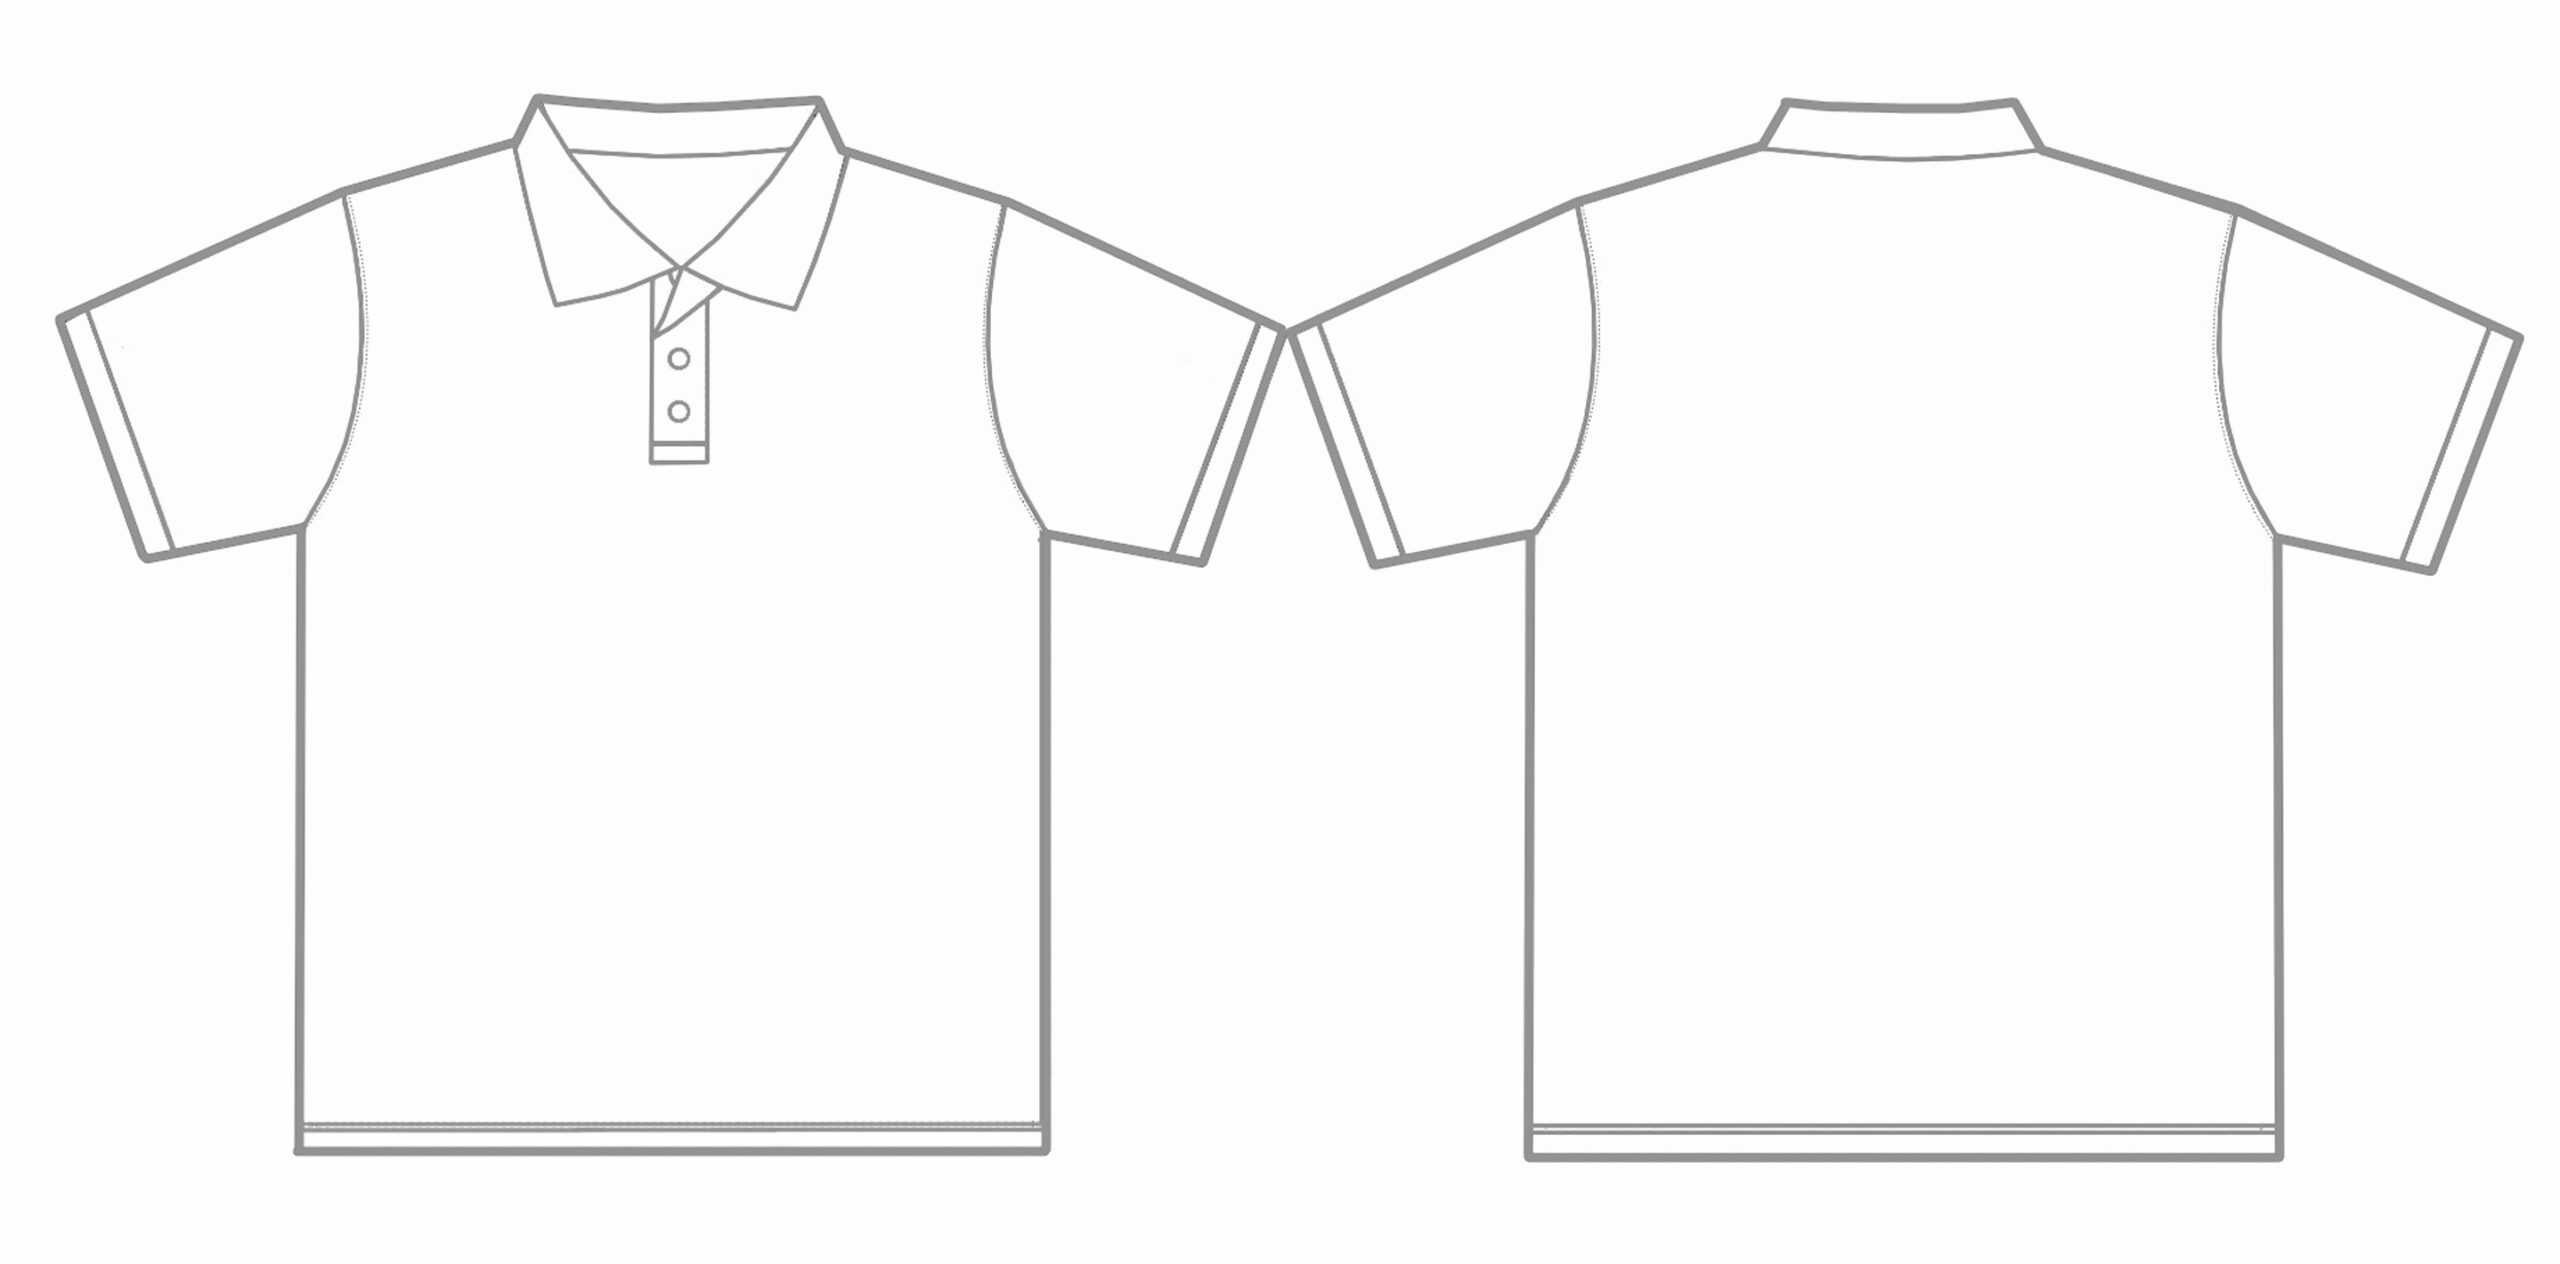 Blank Tshirt Template Pdf | Polo T Shirts Outlet Official With Regard To Blank Tshirt Template Pdf